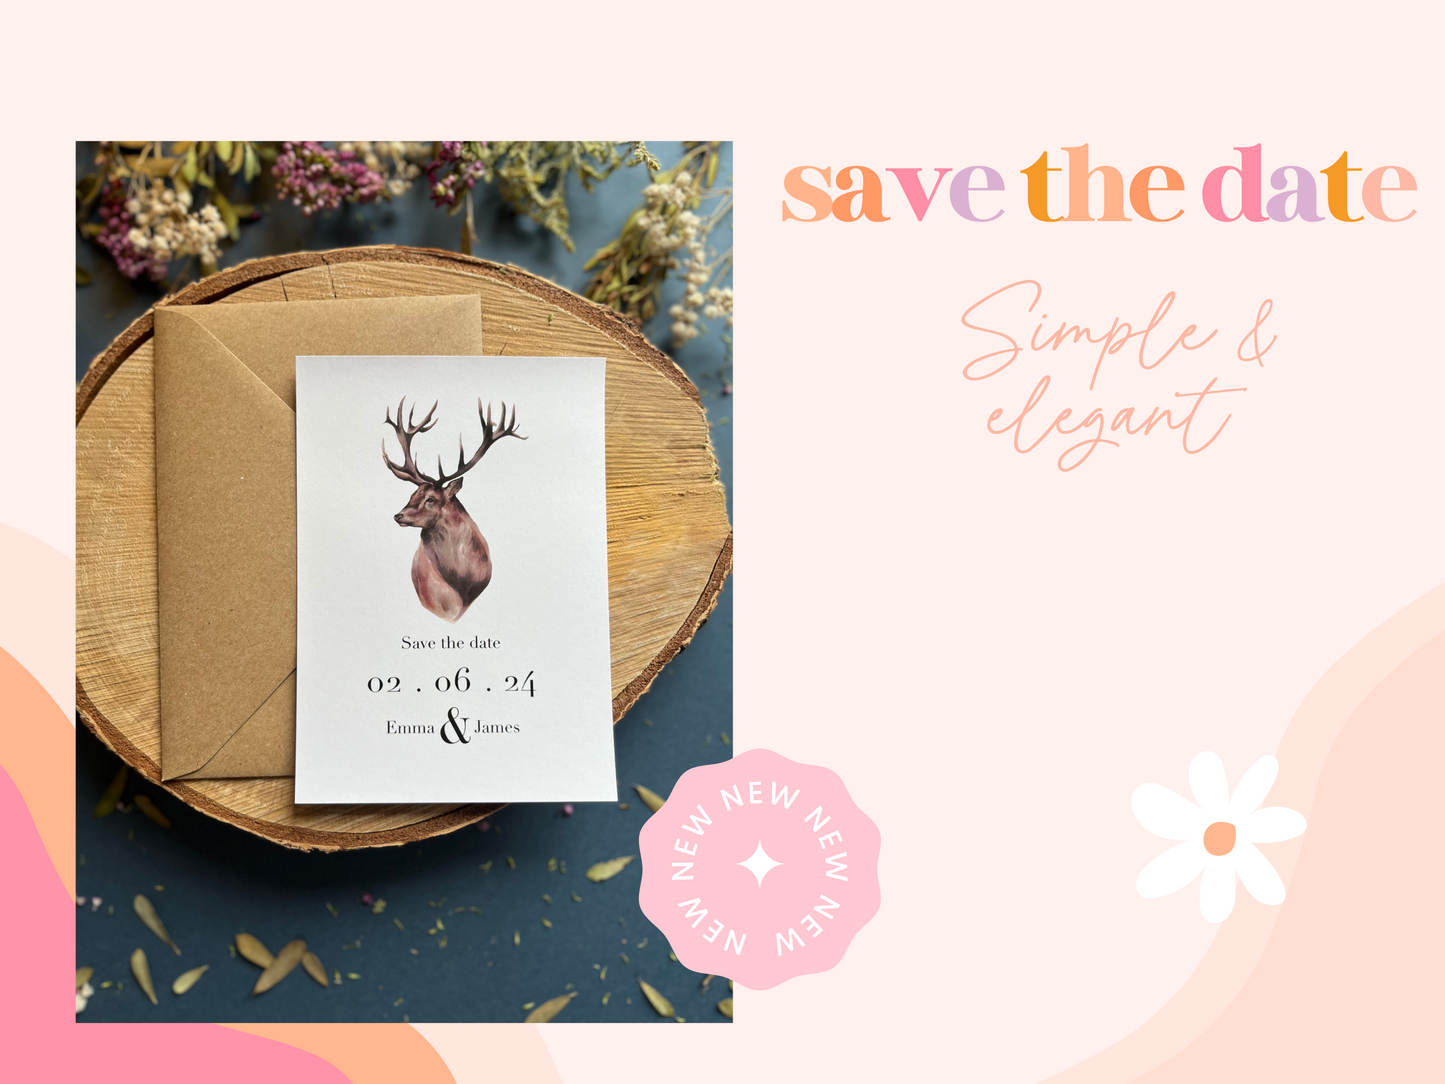 Rustic save the date with Stag design, Scottish themed wedding invitations